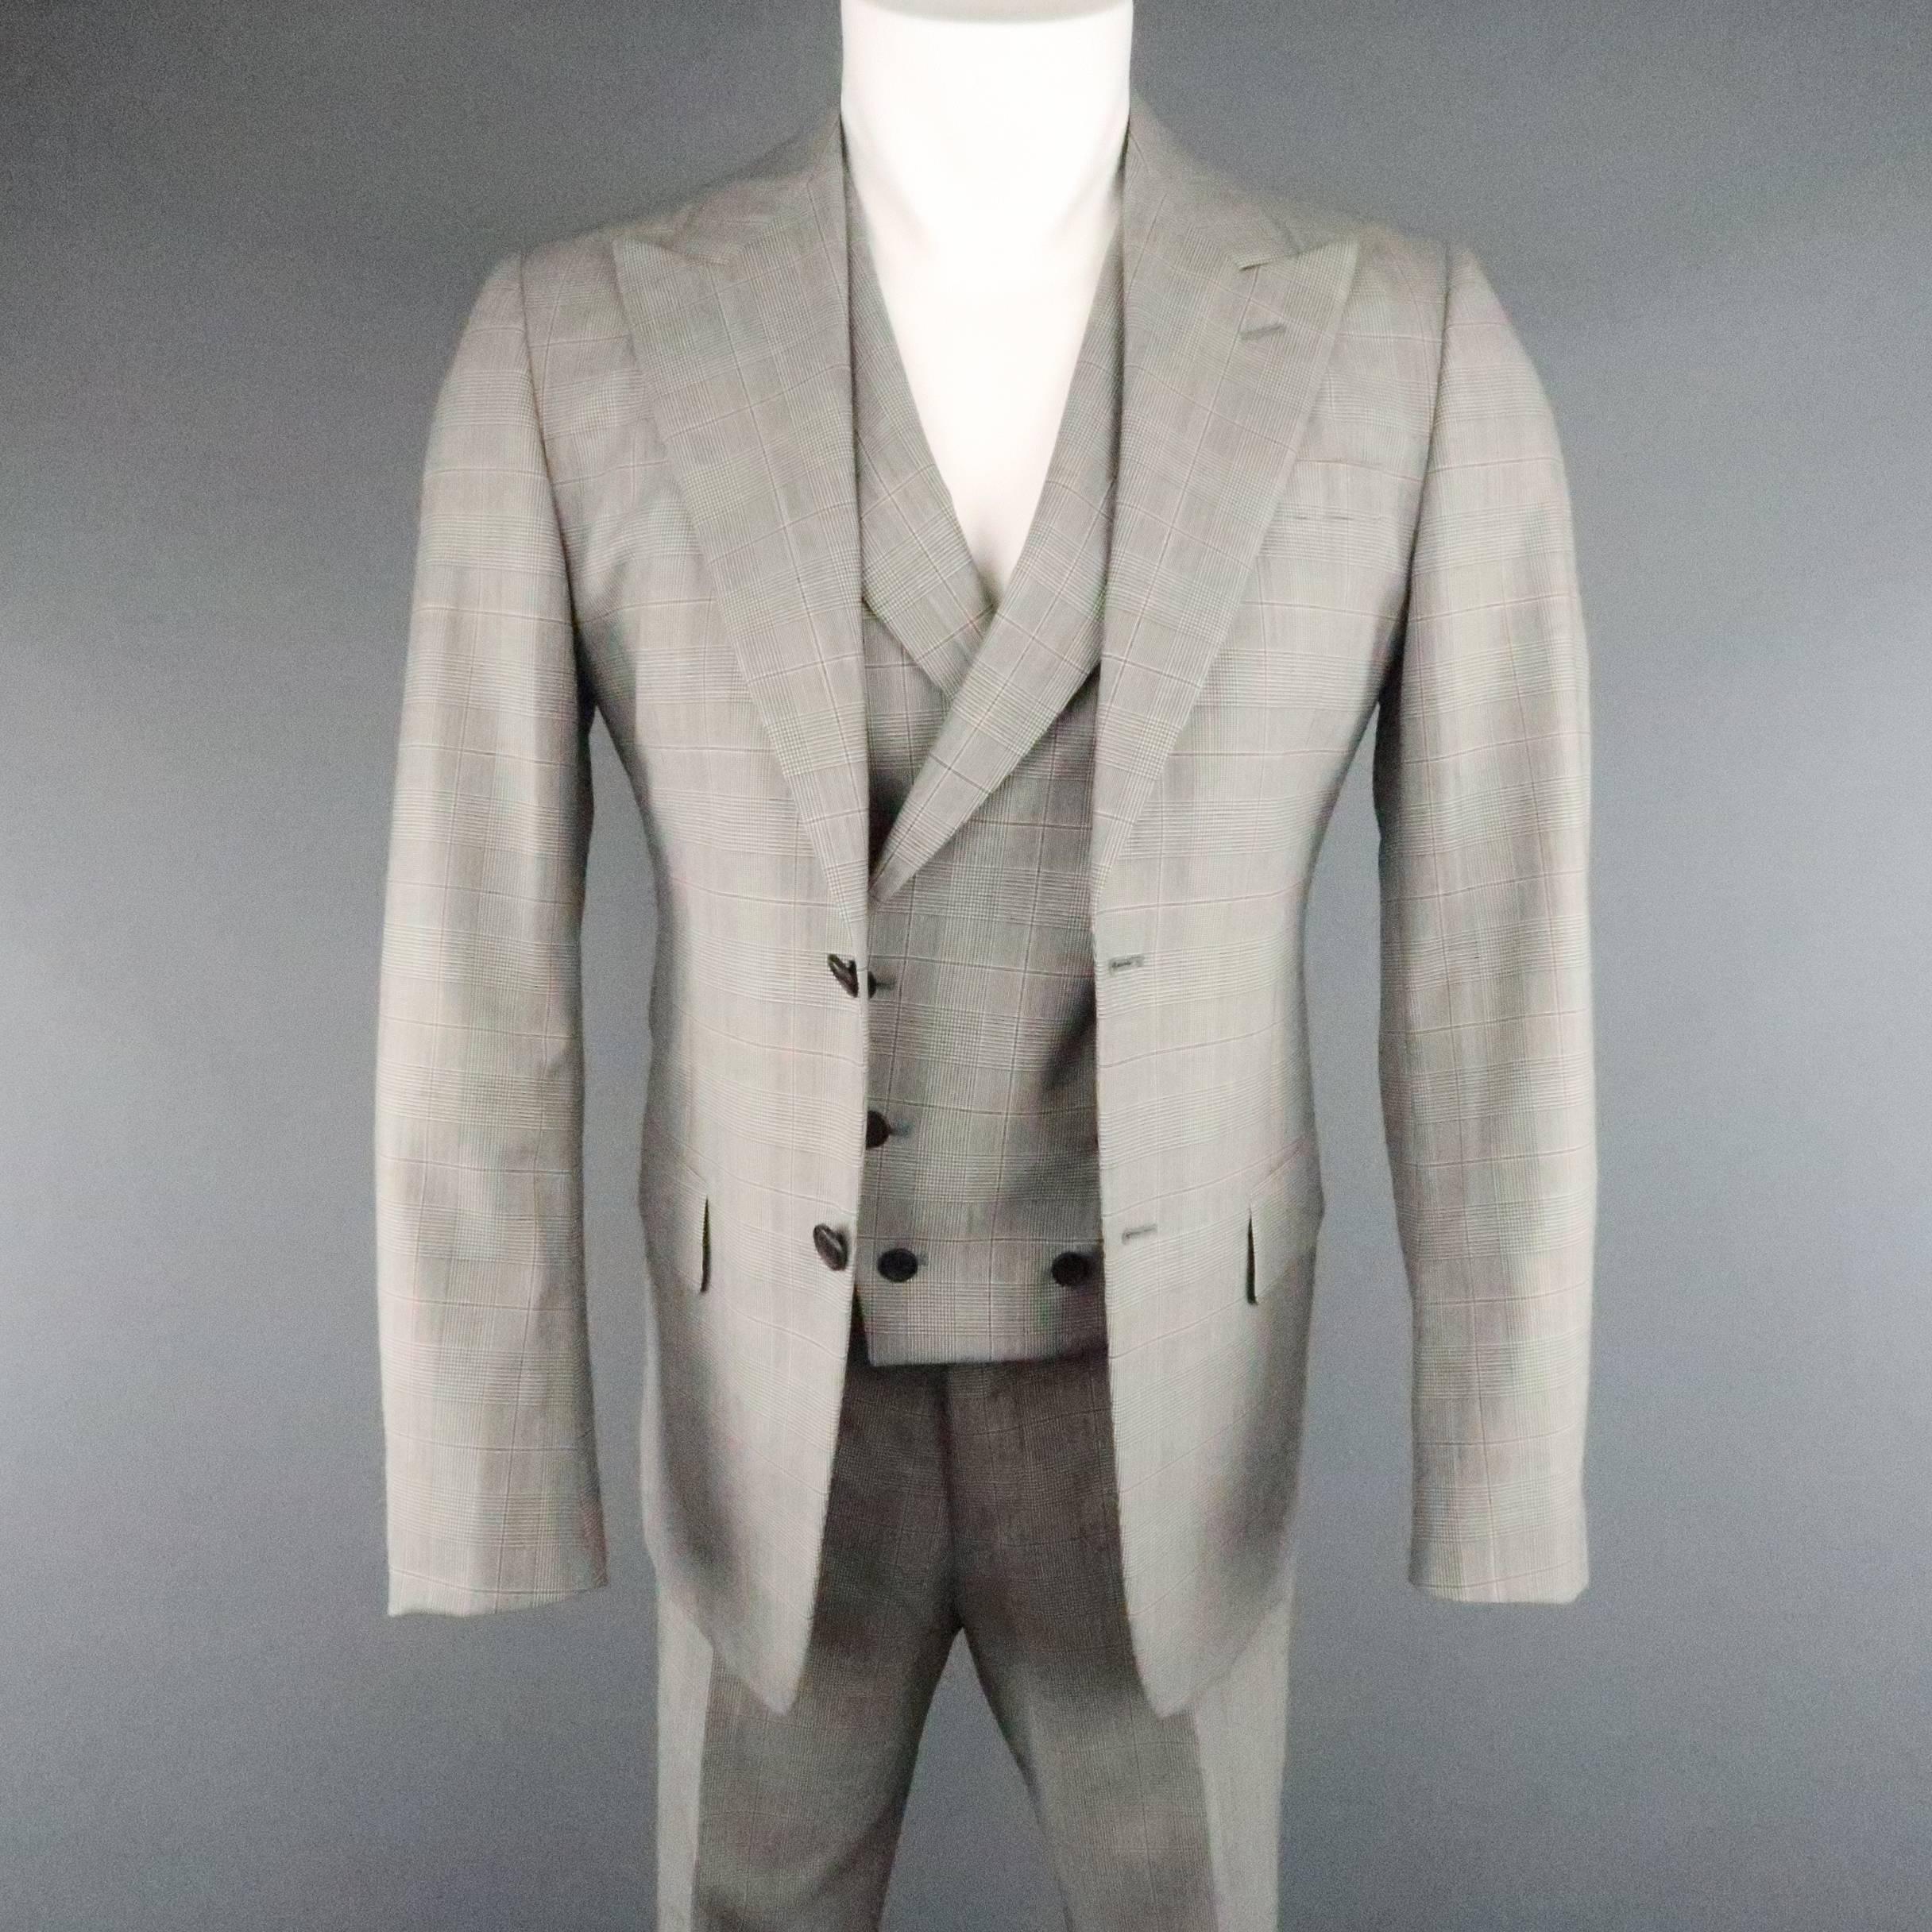 This modern classic three piece PRADA suit comes in a black and white glenplaid wool with deep red stripe and includes a two button, peak lapel sport coat, double breasted peak lapel vest with burgundy satin back, and flat front, cuffed trousers.